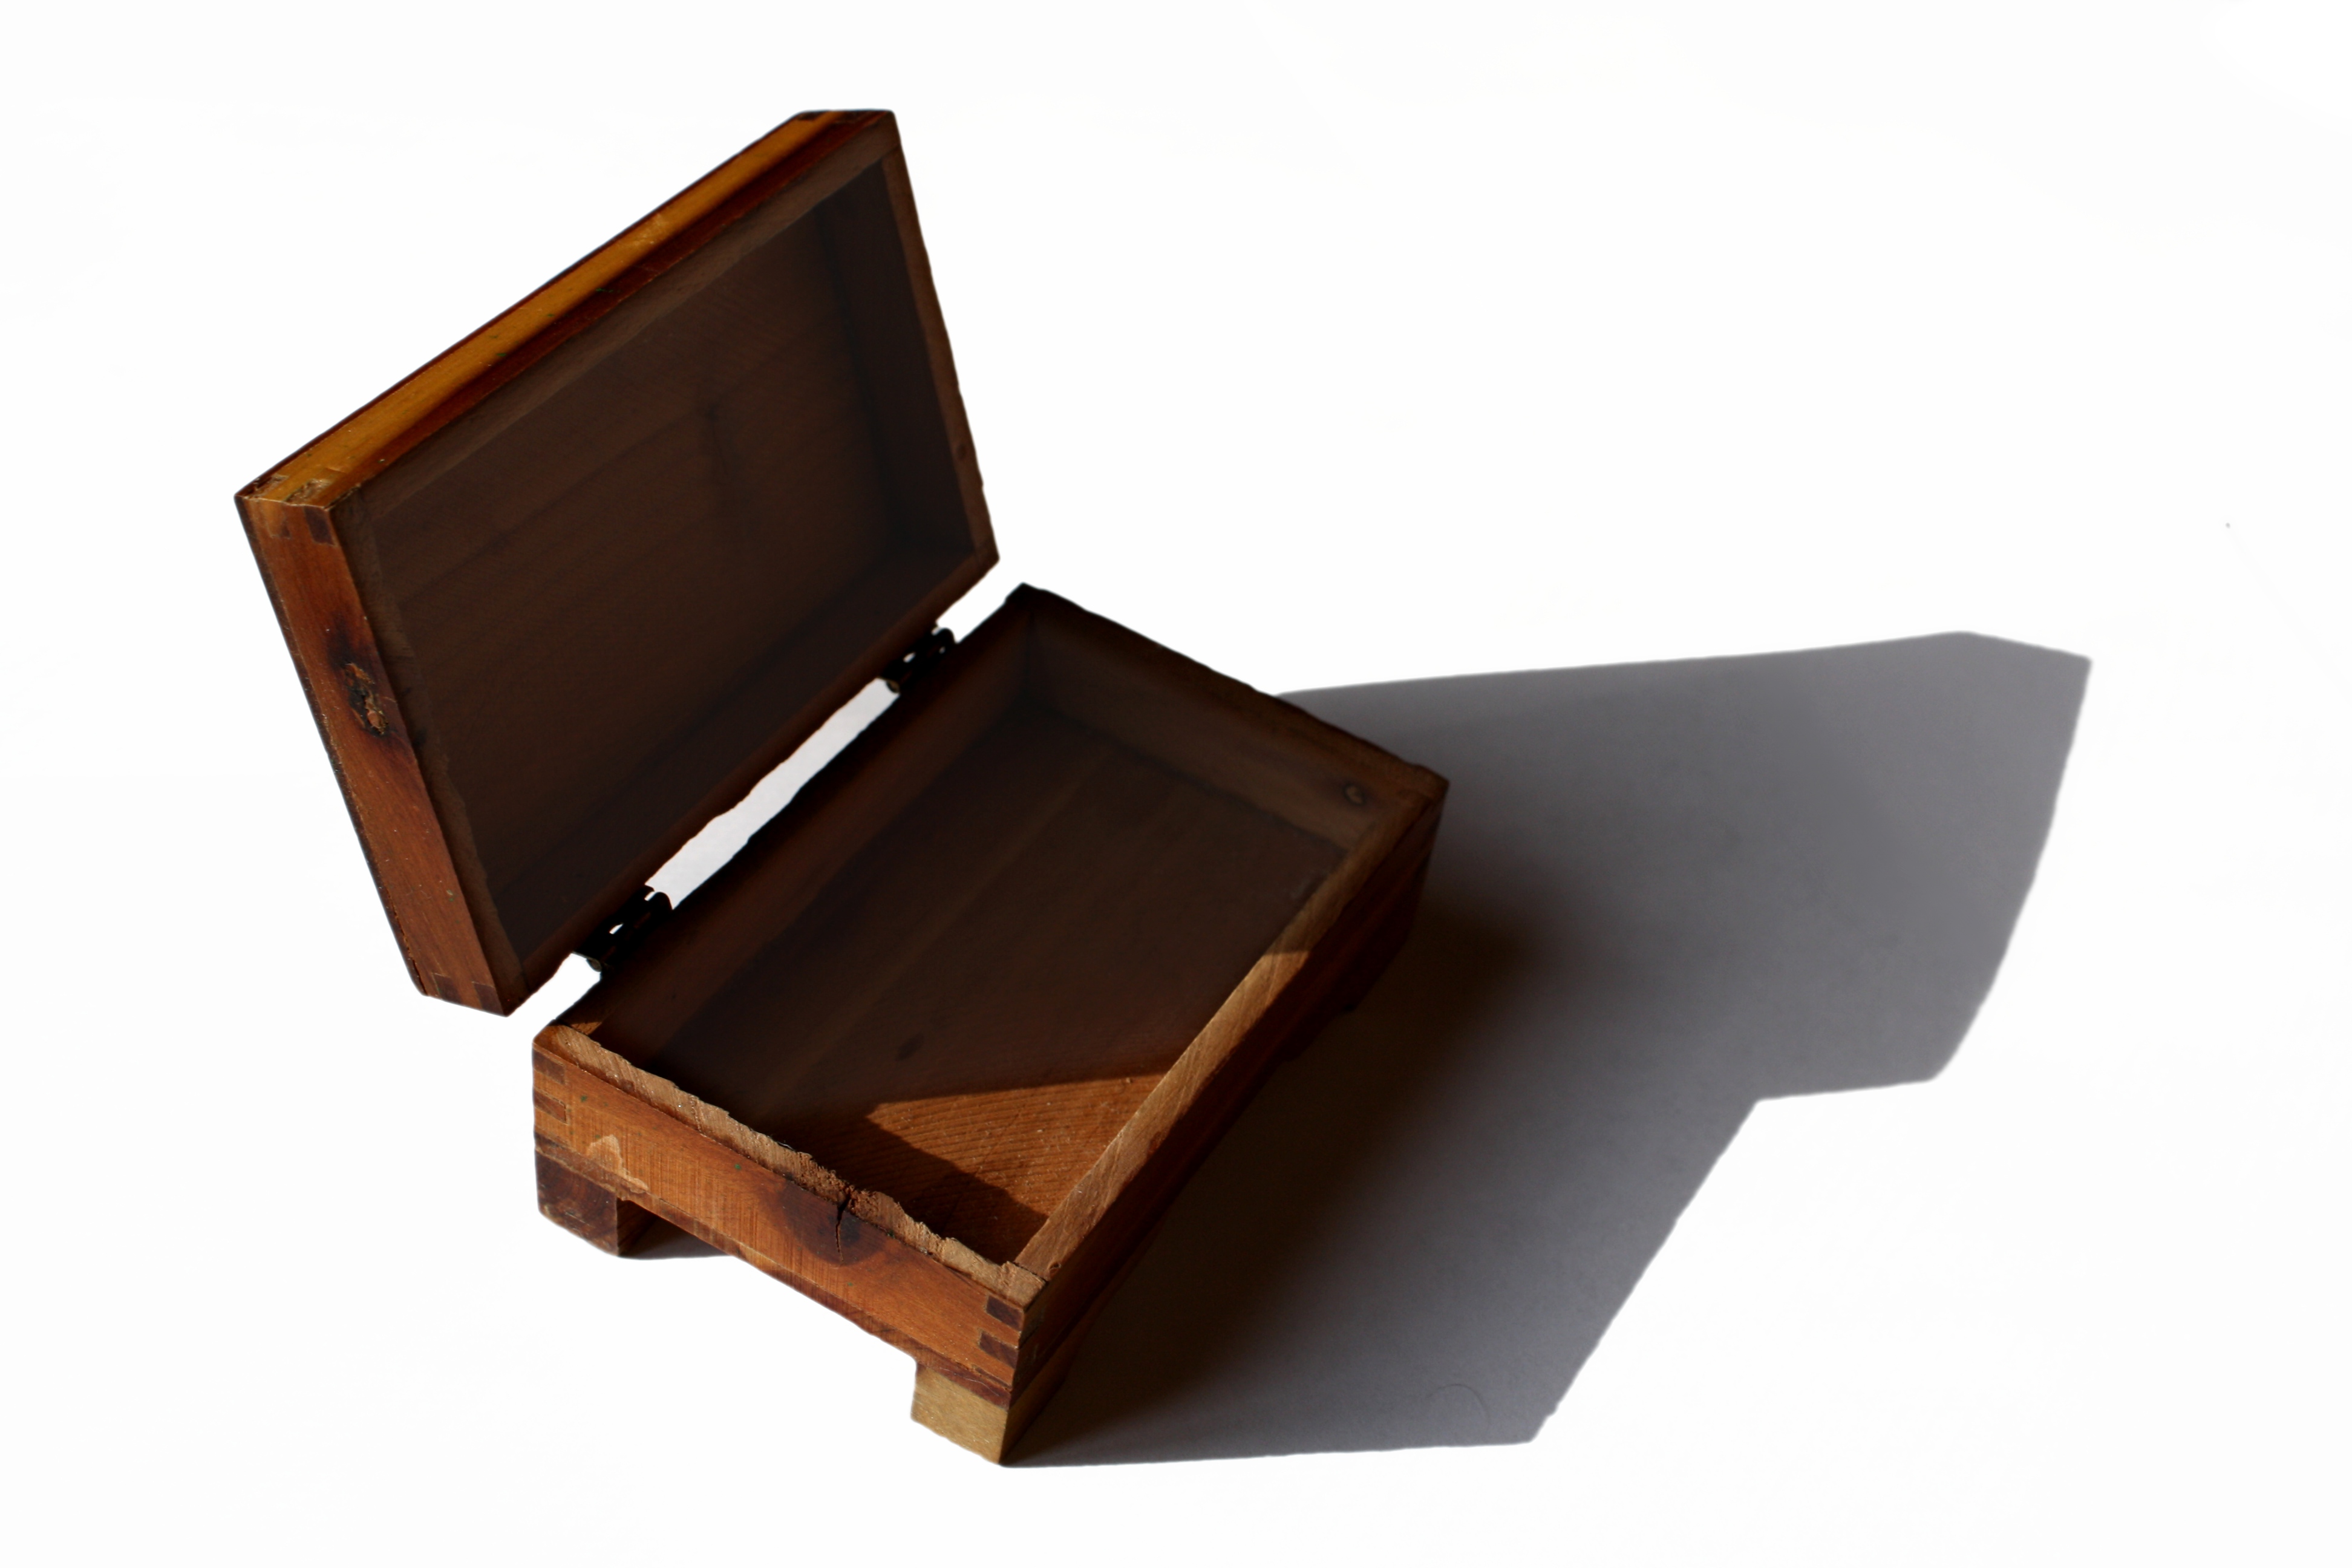 Small Wooden Box with Hinged Lid Picture Free Photograph 